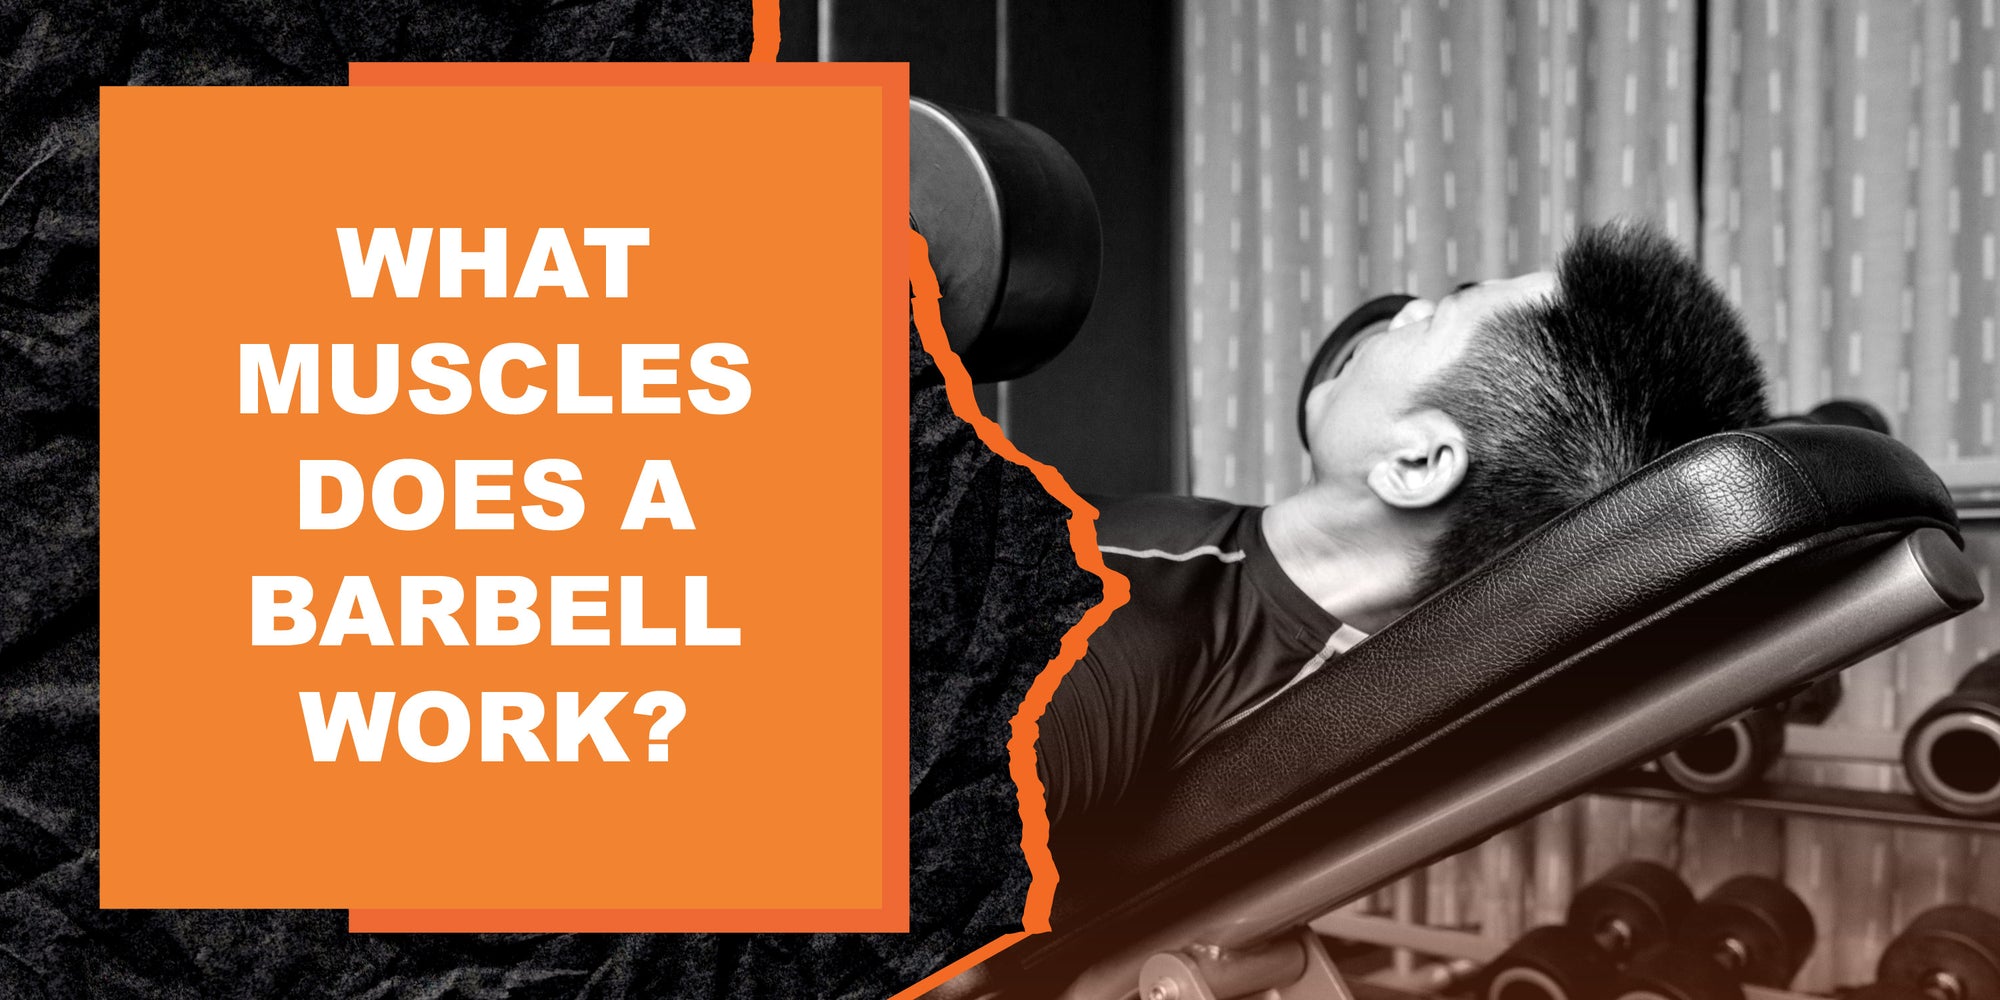 What Muscles Does a Barbell Work?